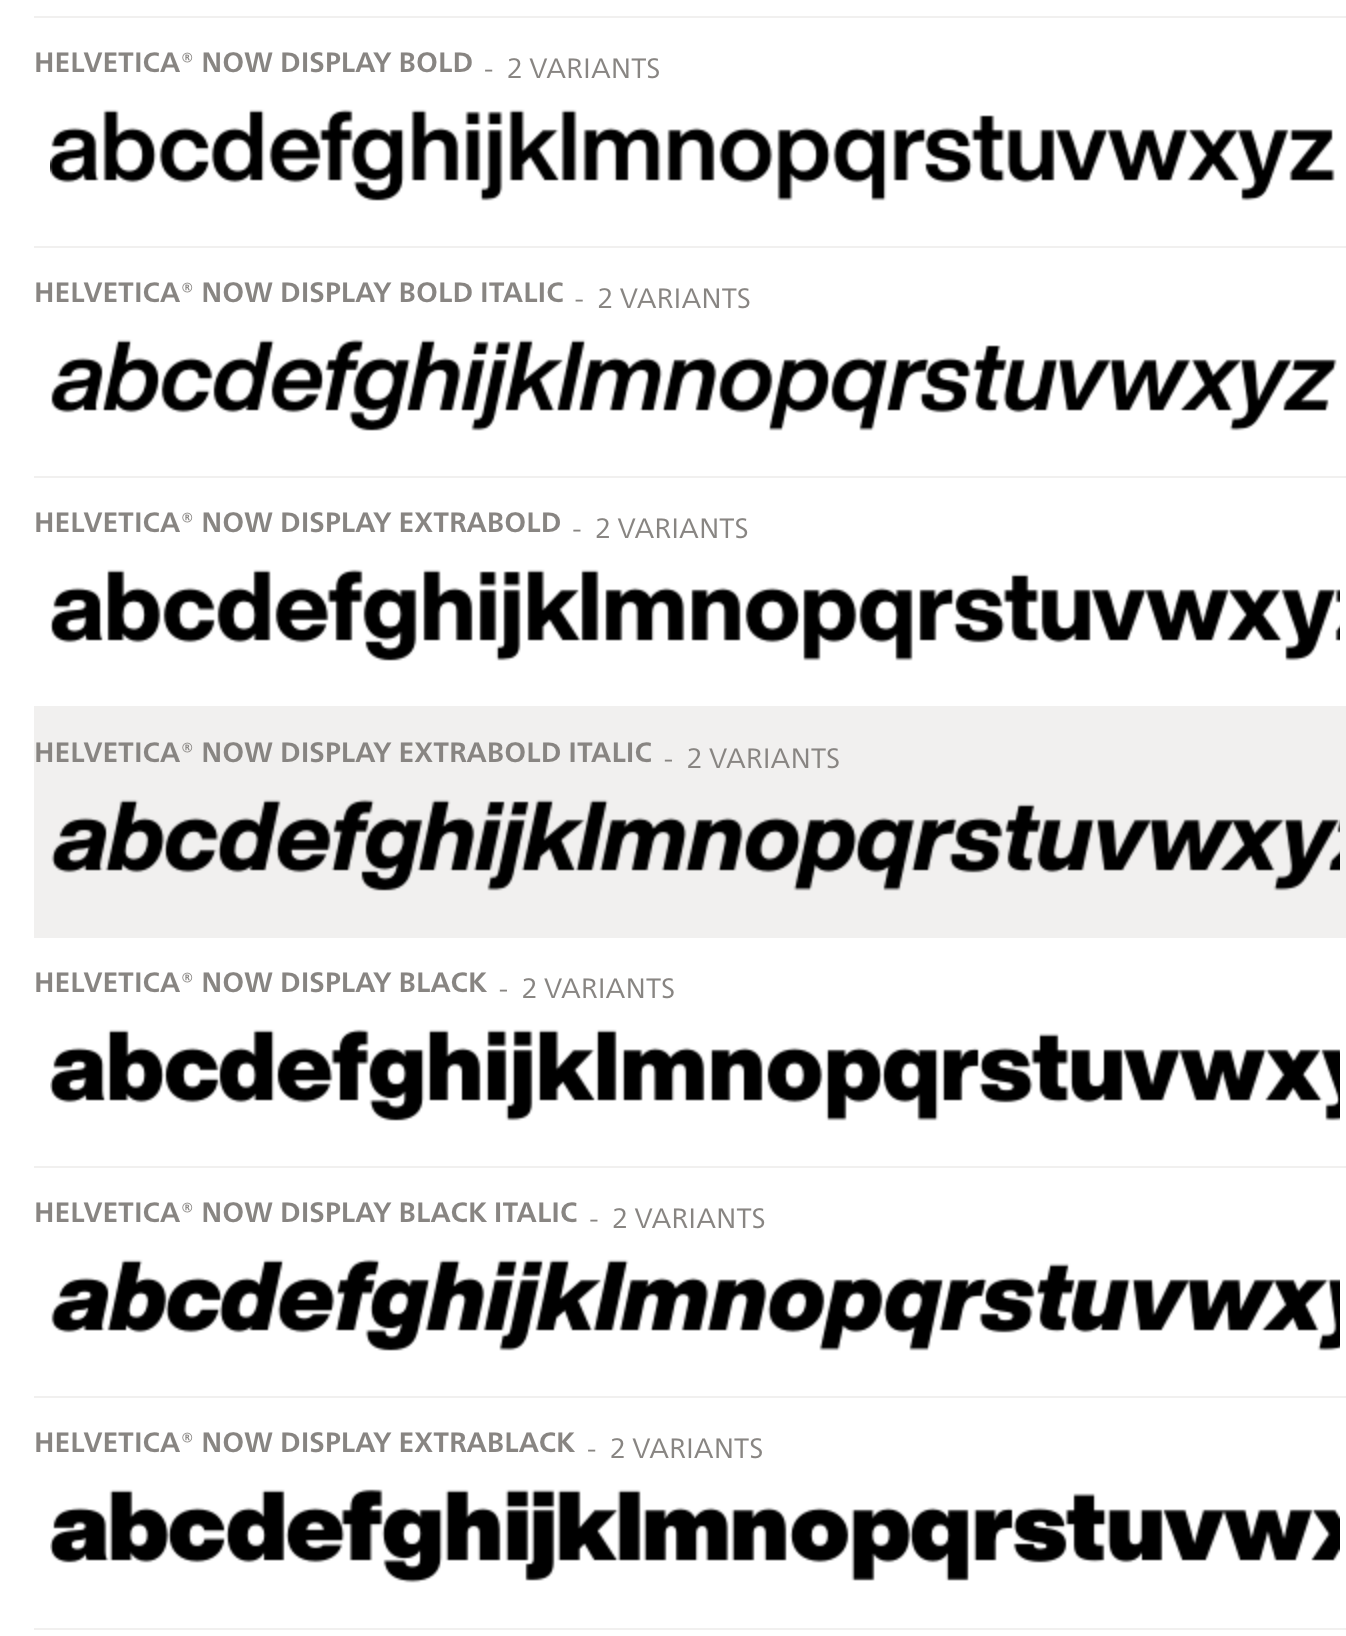 helvetica now and helvetica comparinson